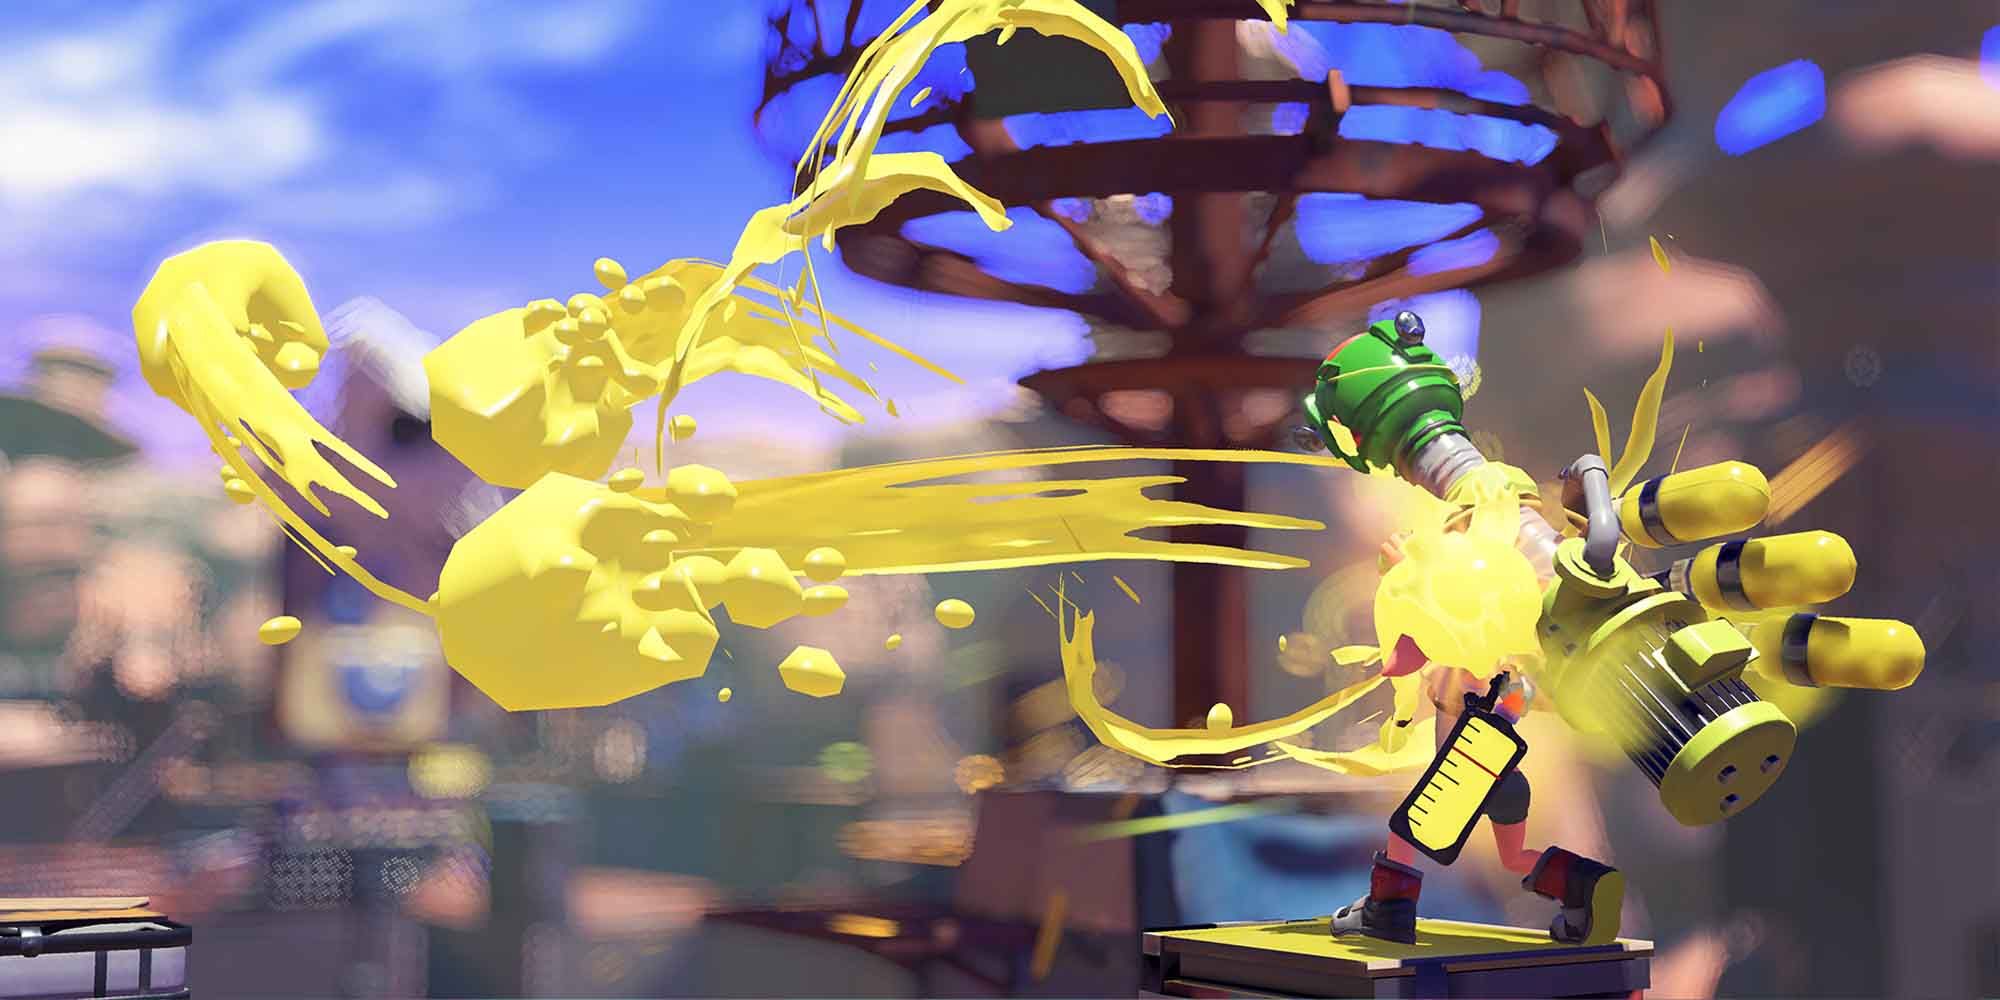 Using the Trizooka special weapon in Splatoon 3